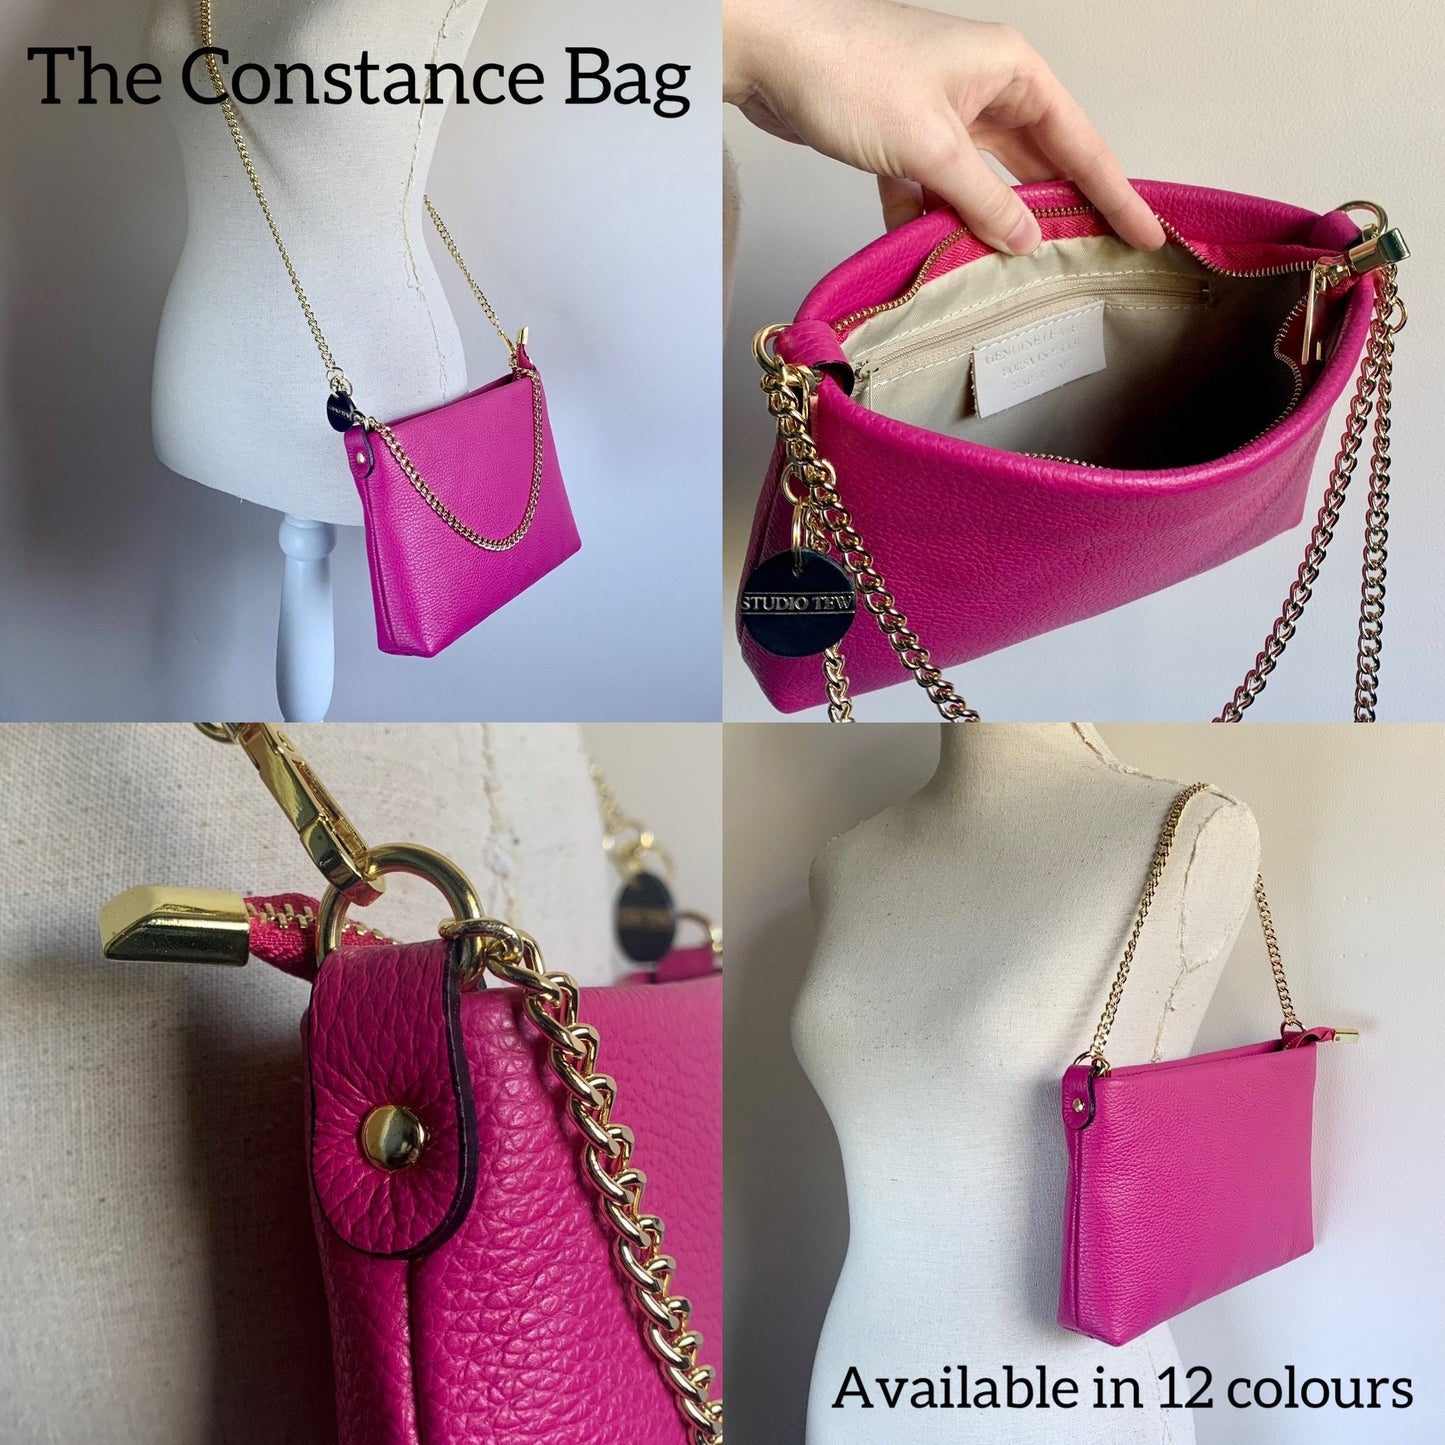 White Leather Multiway Chain Bag - Constance